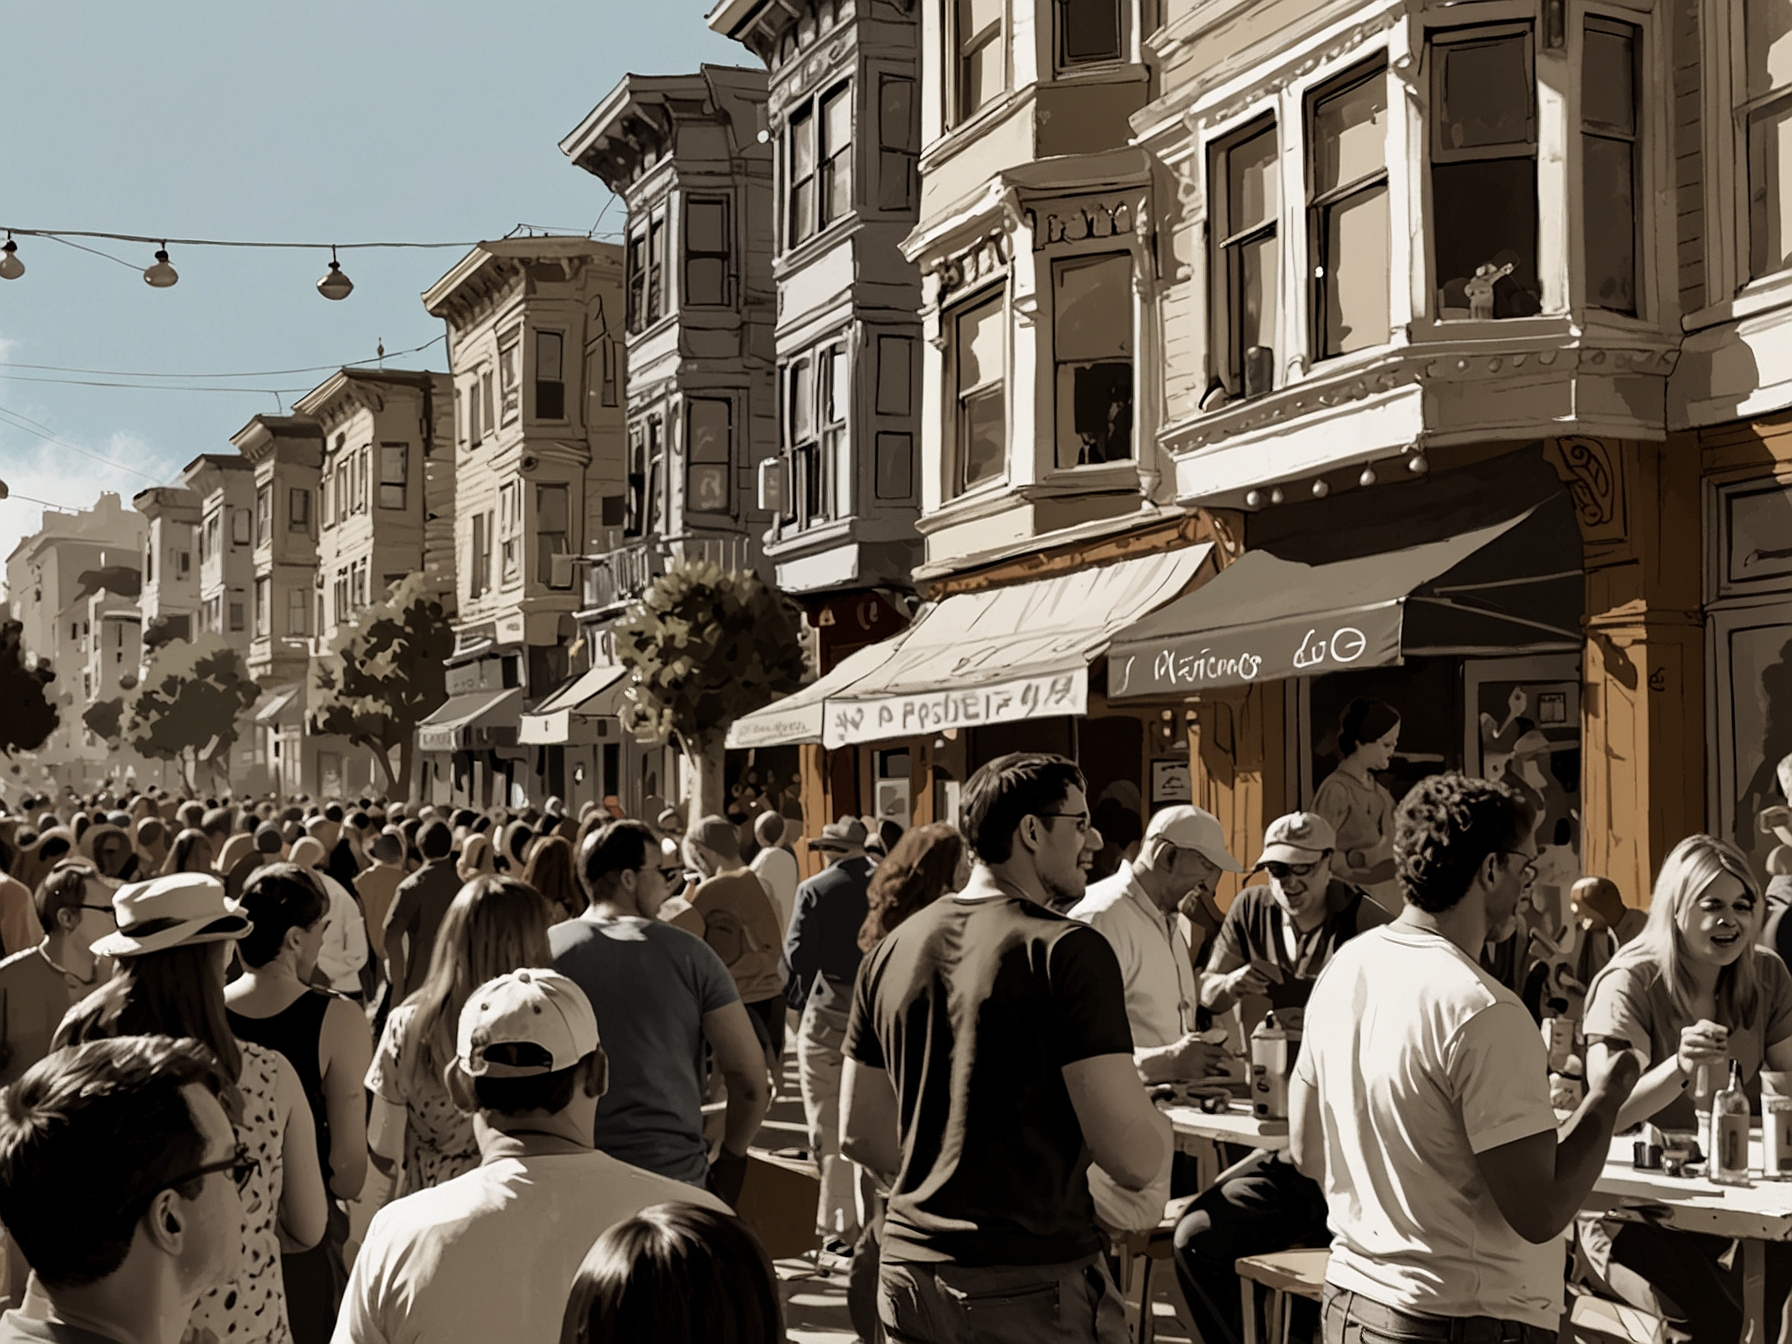 A bustling San Francisco street filled with people enjoying live music during the Porchfest event in the Mission District.